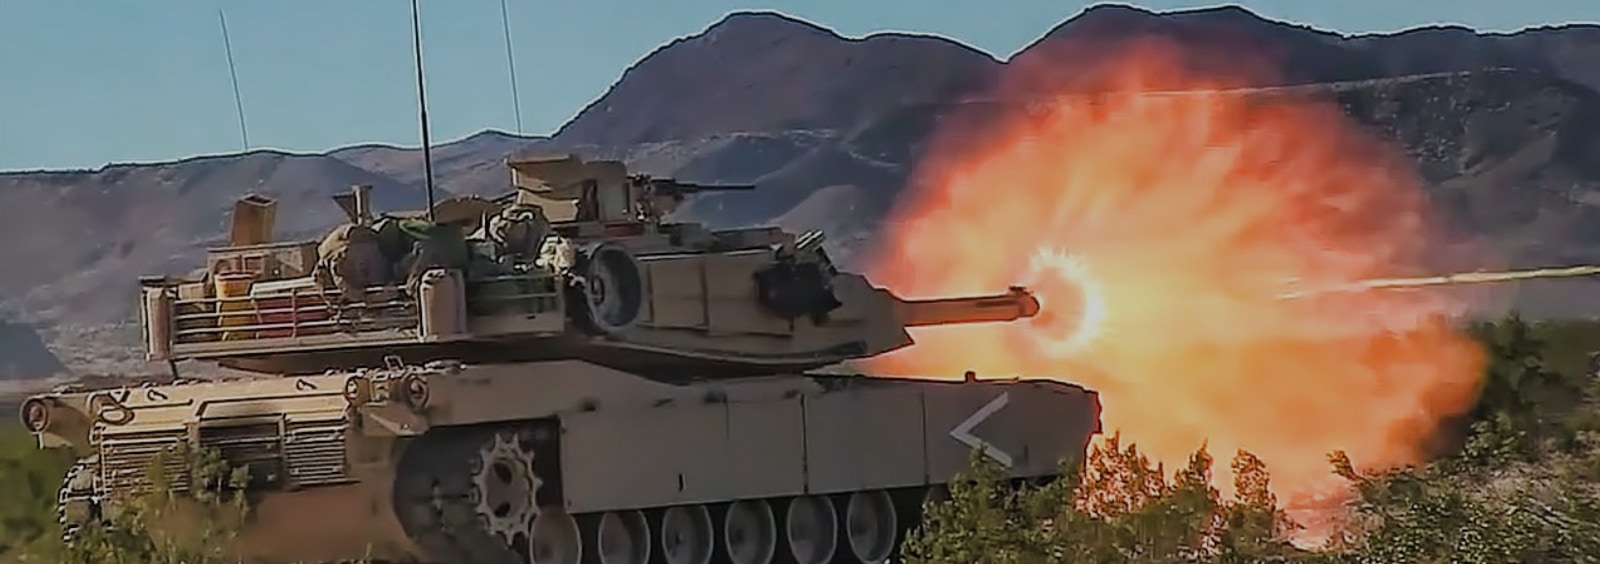 A tank with flames coming out of it.